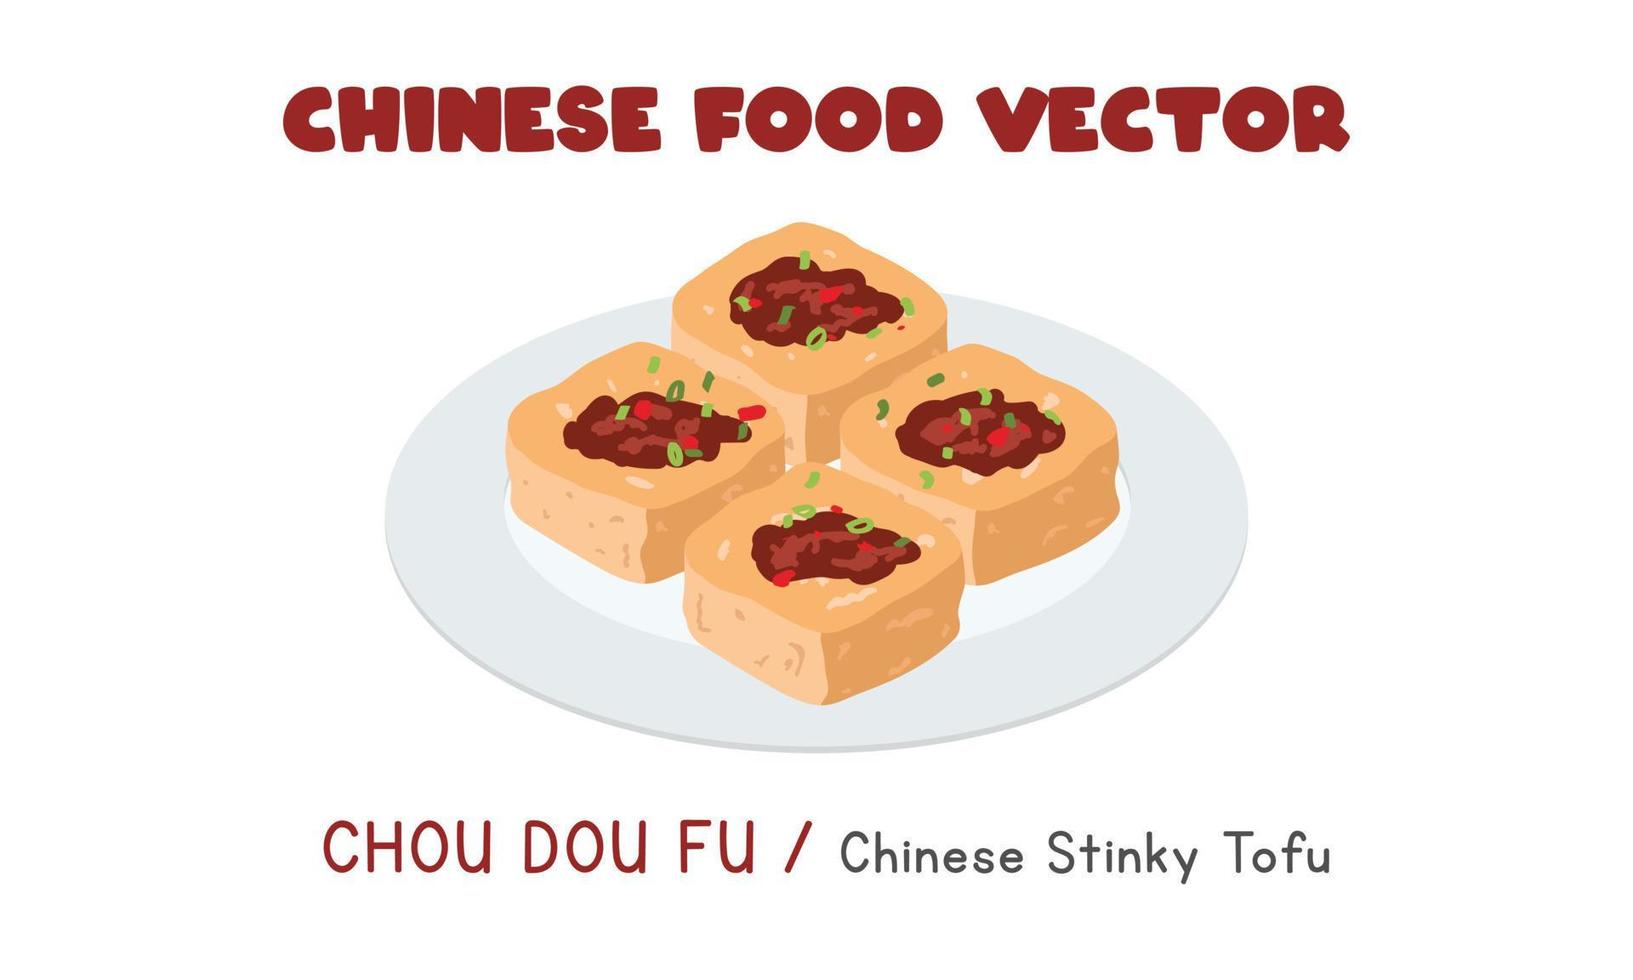 Chinese Chou Dou Fu - Chinese Stinky Tofu flat vector design illustration, clipart cartoon style. Asian food. Chinese cuisine. Chinese food